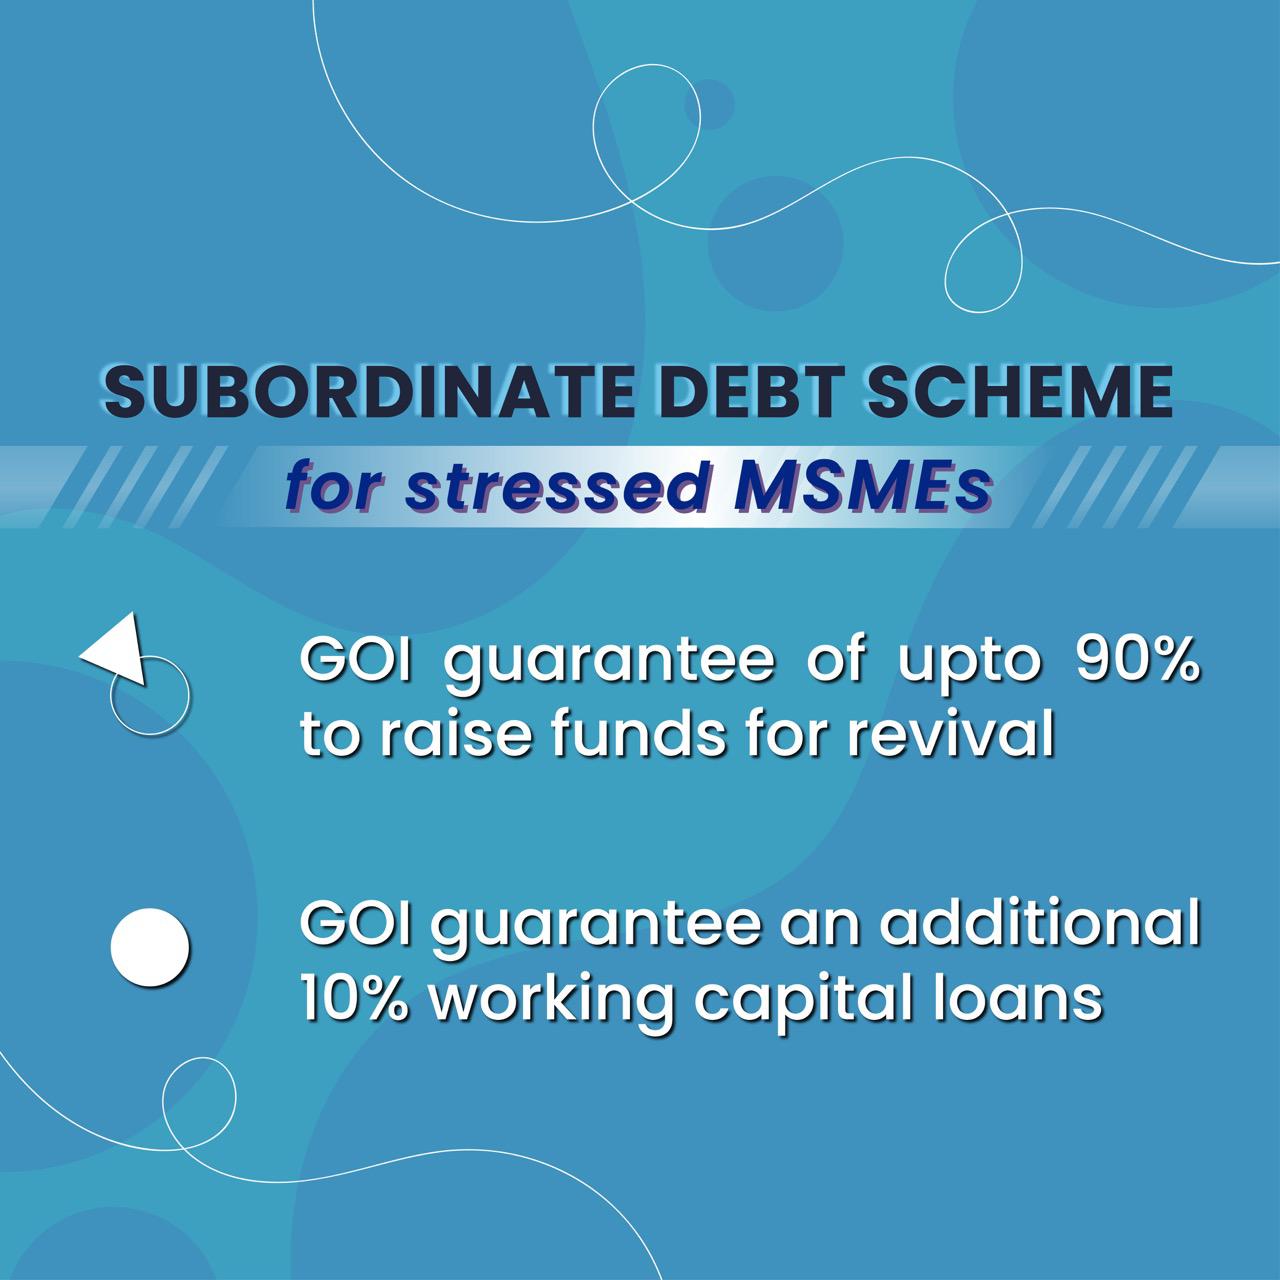 Ministry of MSME on Twitter: "Distressed Assets Fund-Subordinate Debt Scheme  for MSMEs #MSMEs can do business ...